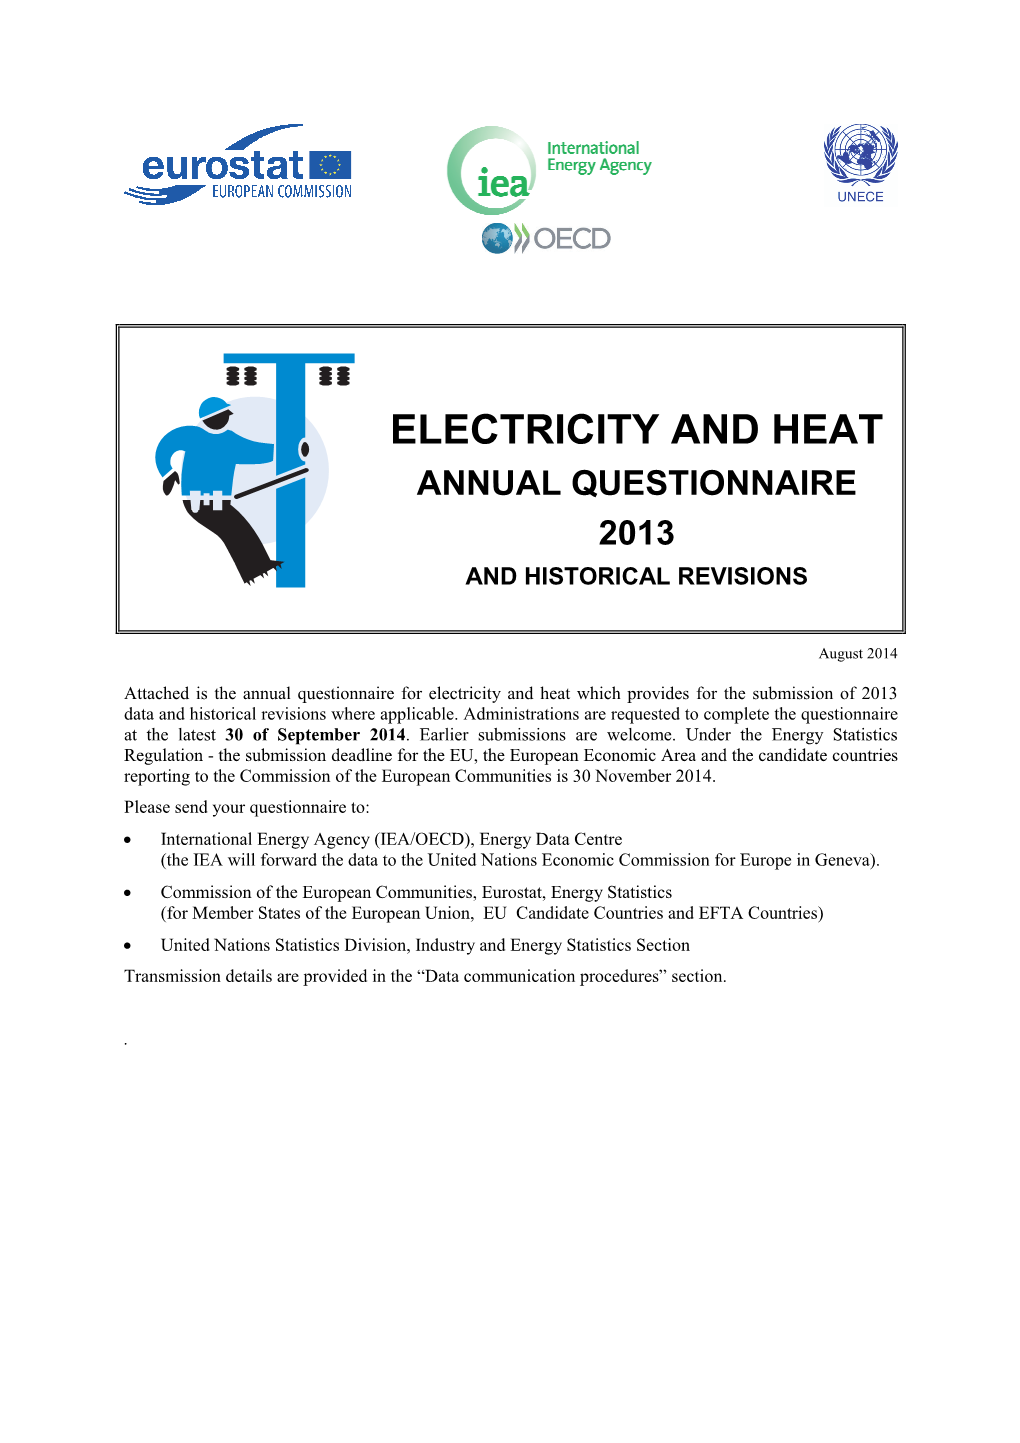 Electricity and Heat Annual Questionnaire 2013 and Historical Revisions